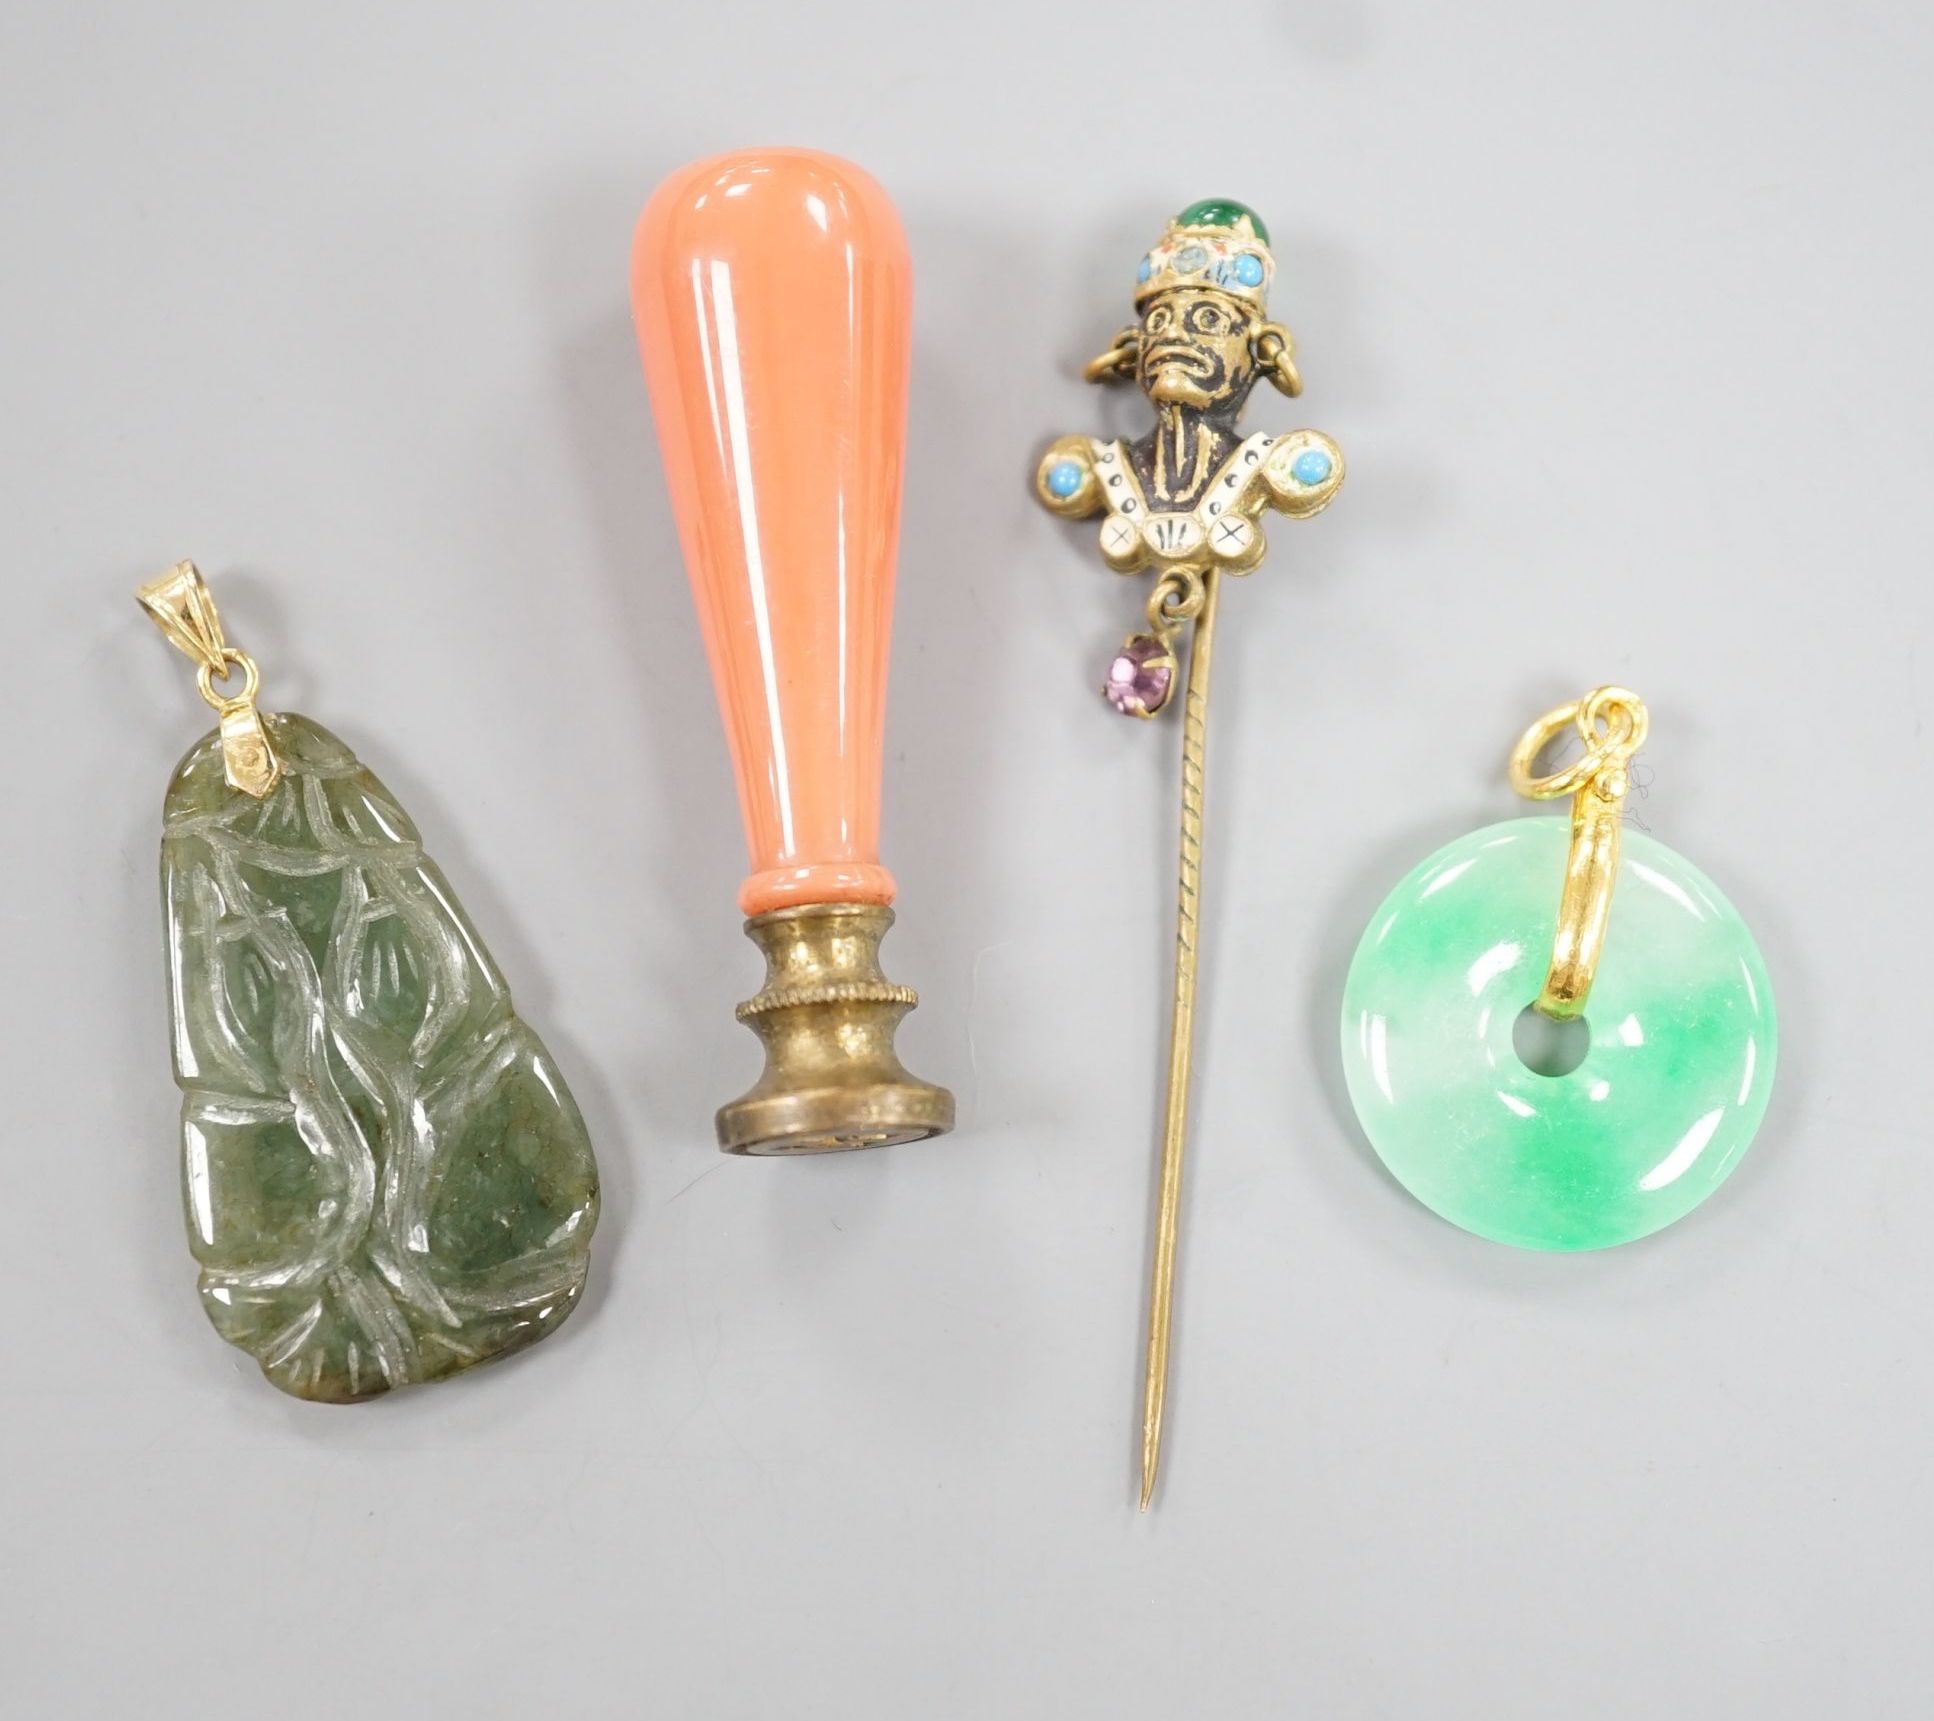 An 18k mounted jade set teardrop shaped pendant, 36mm and three other items of jewellery, including a seal and stick pin.